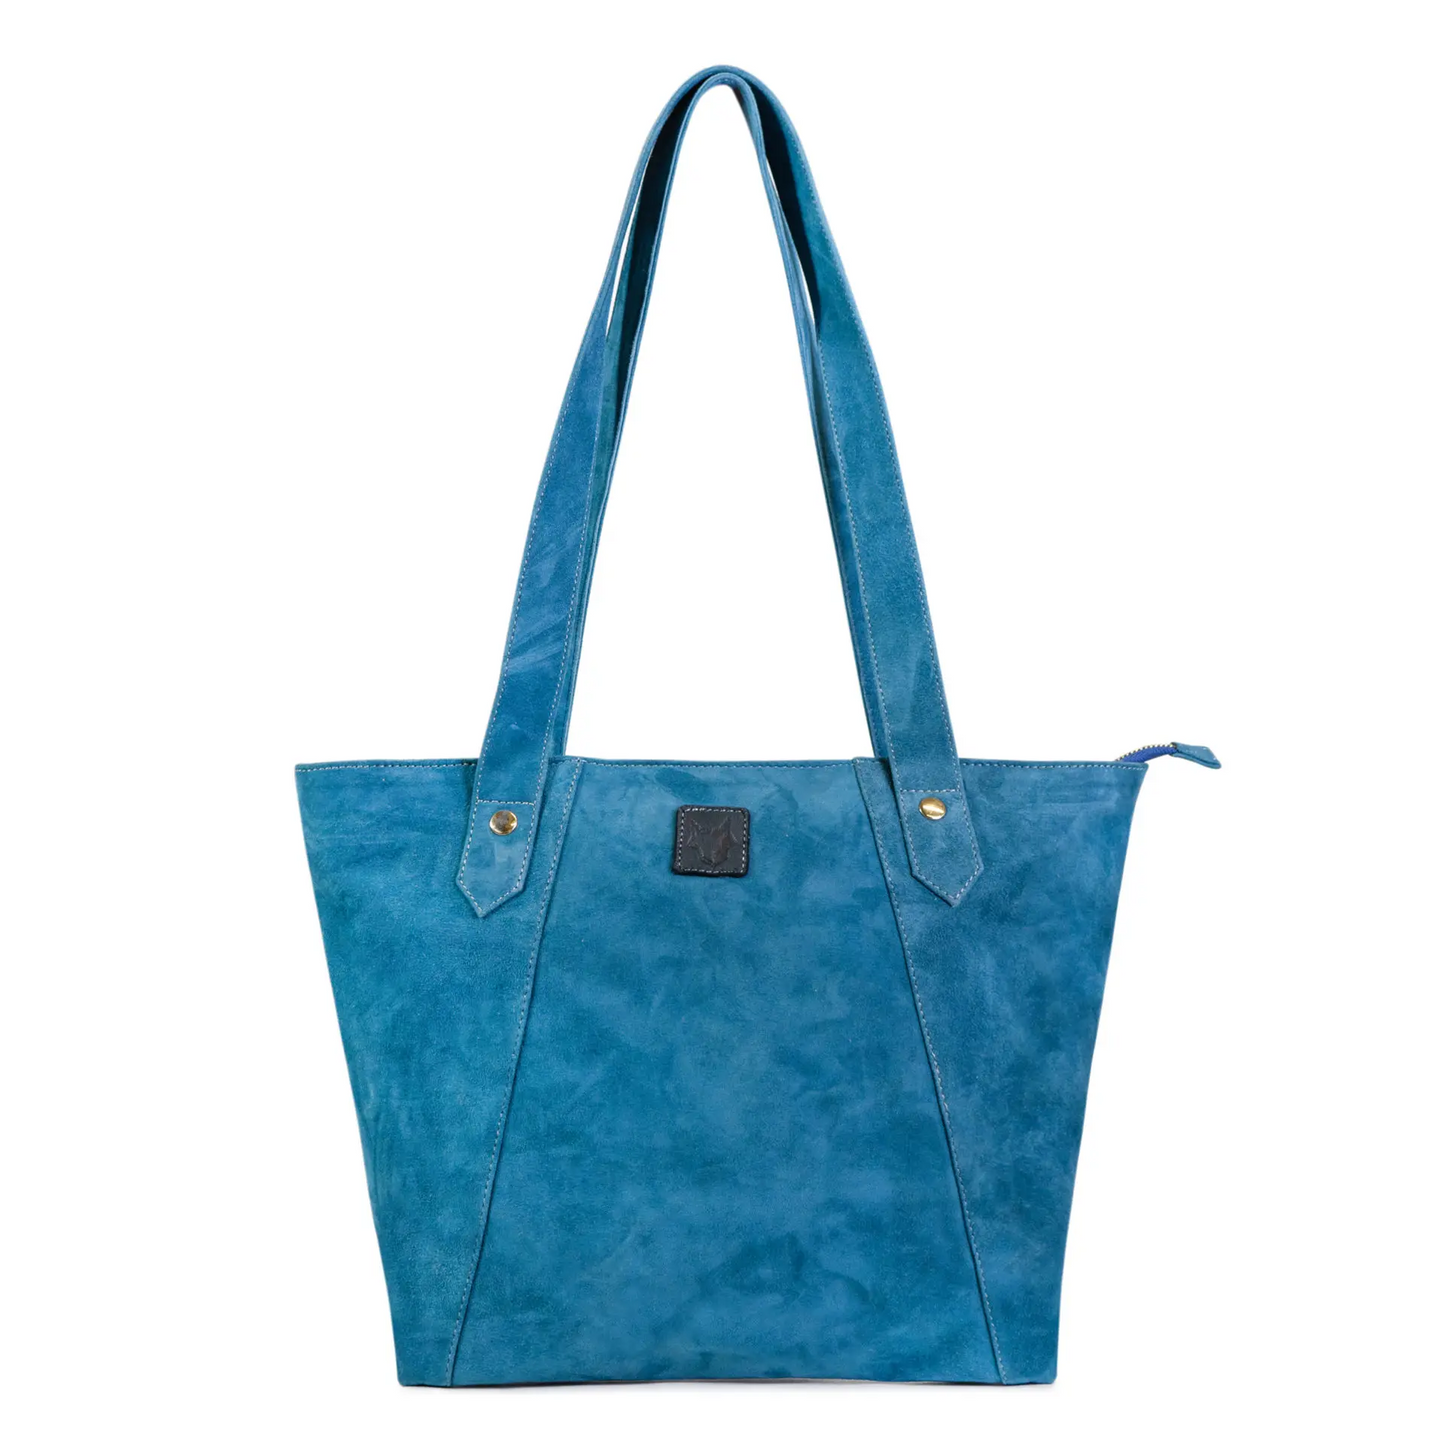 The Blue Suede Tote